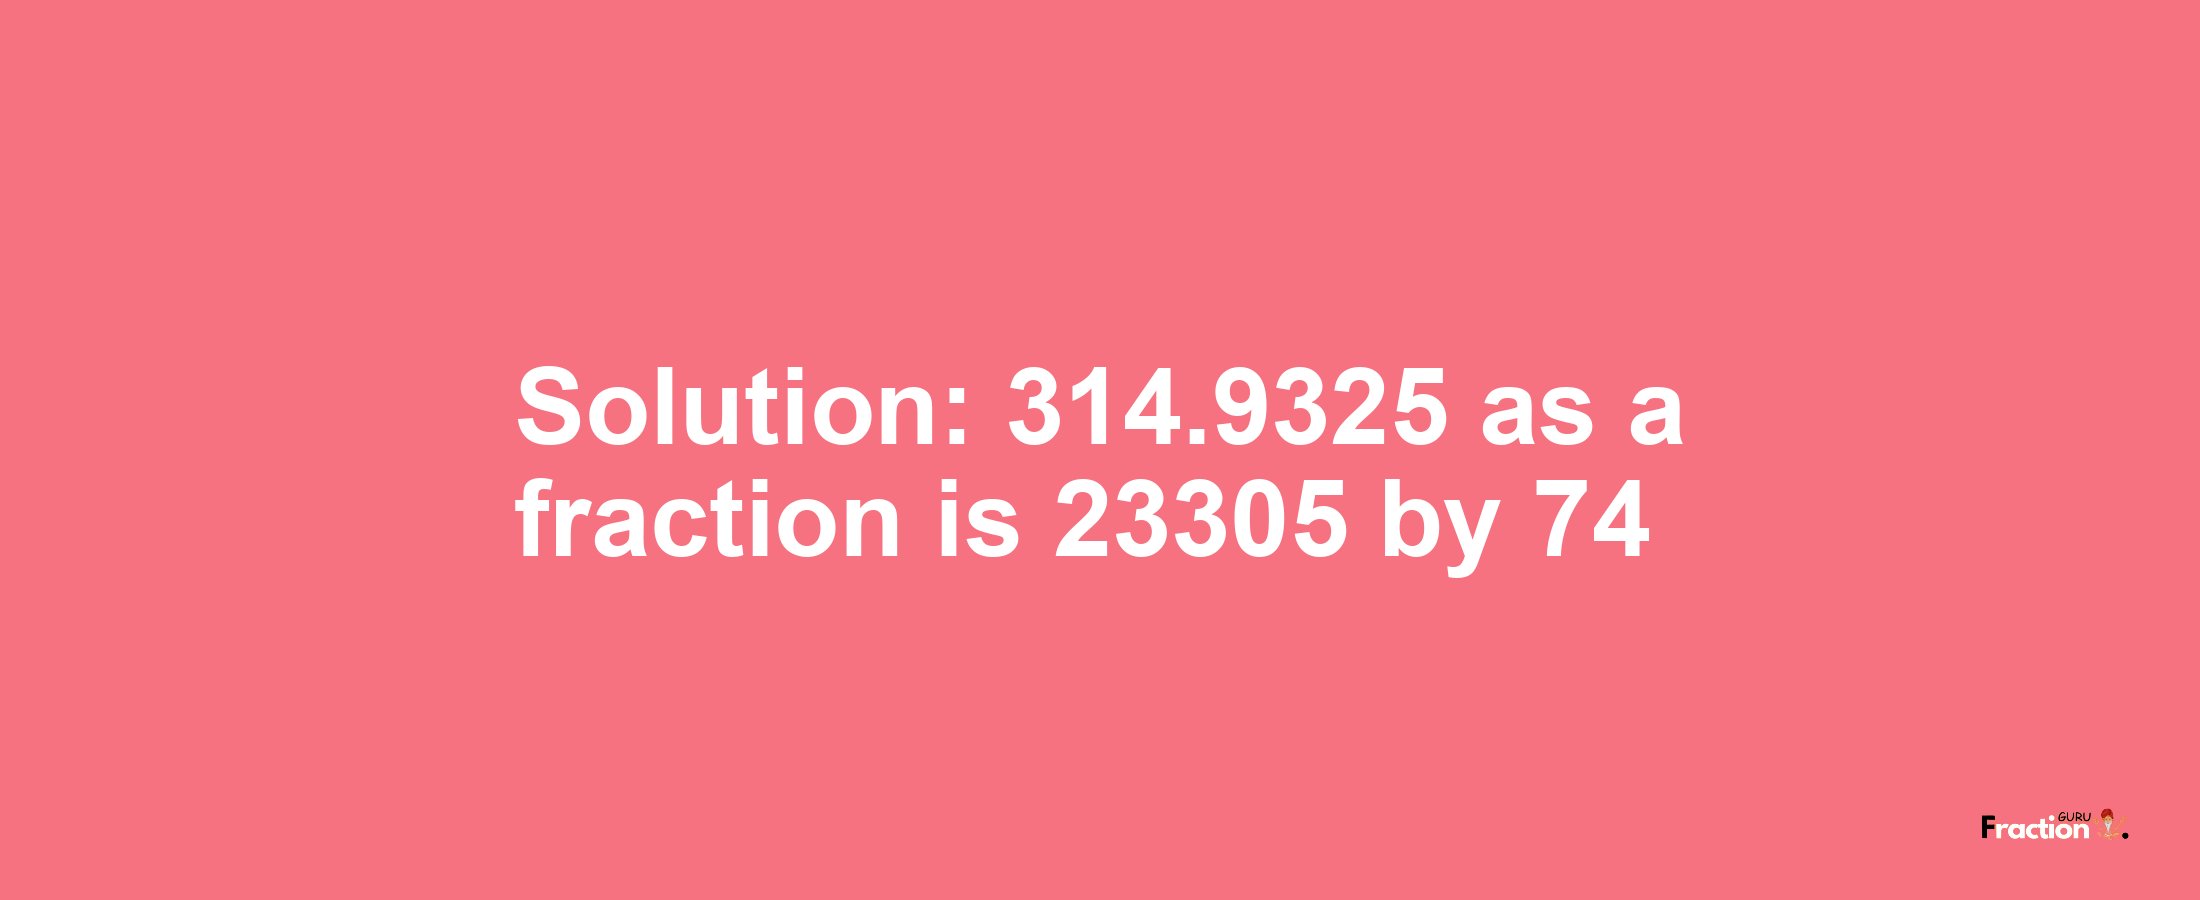 Solution:314.9325 as a fraction is 23305/74